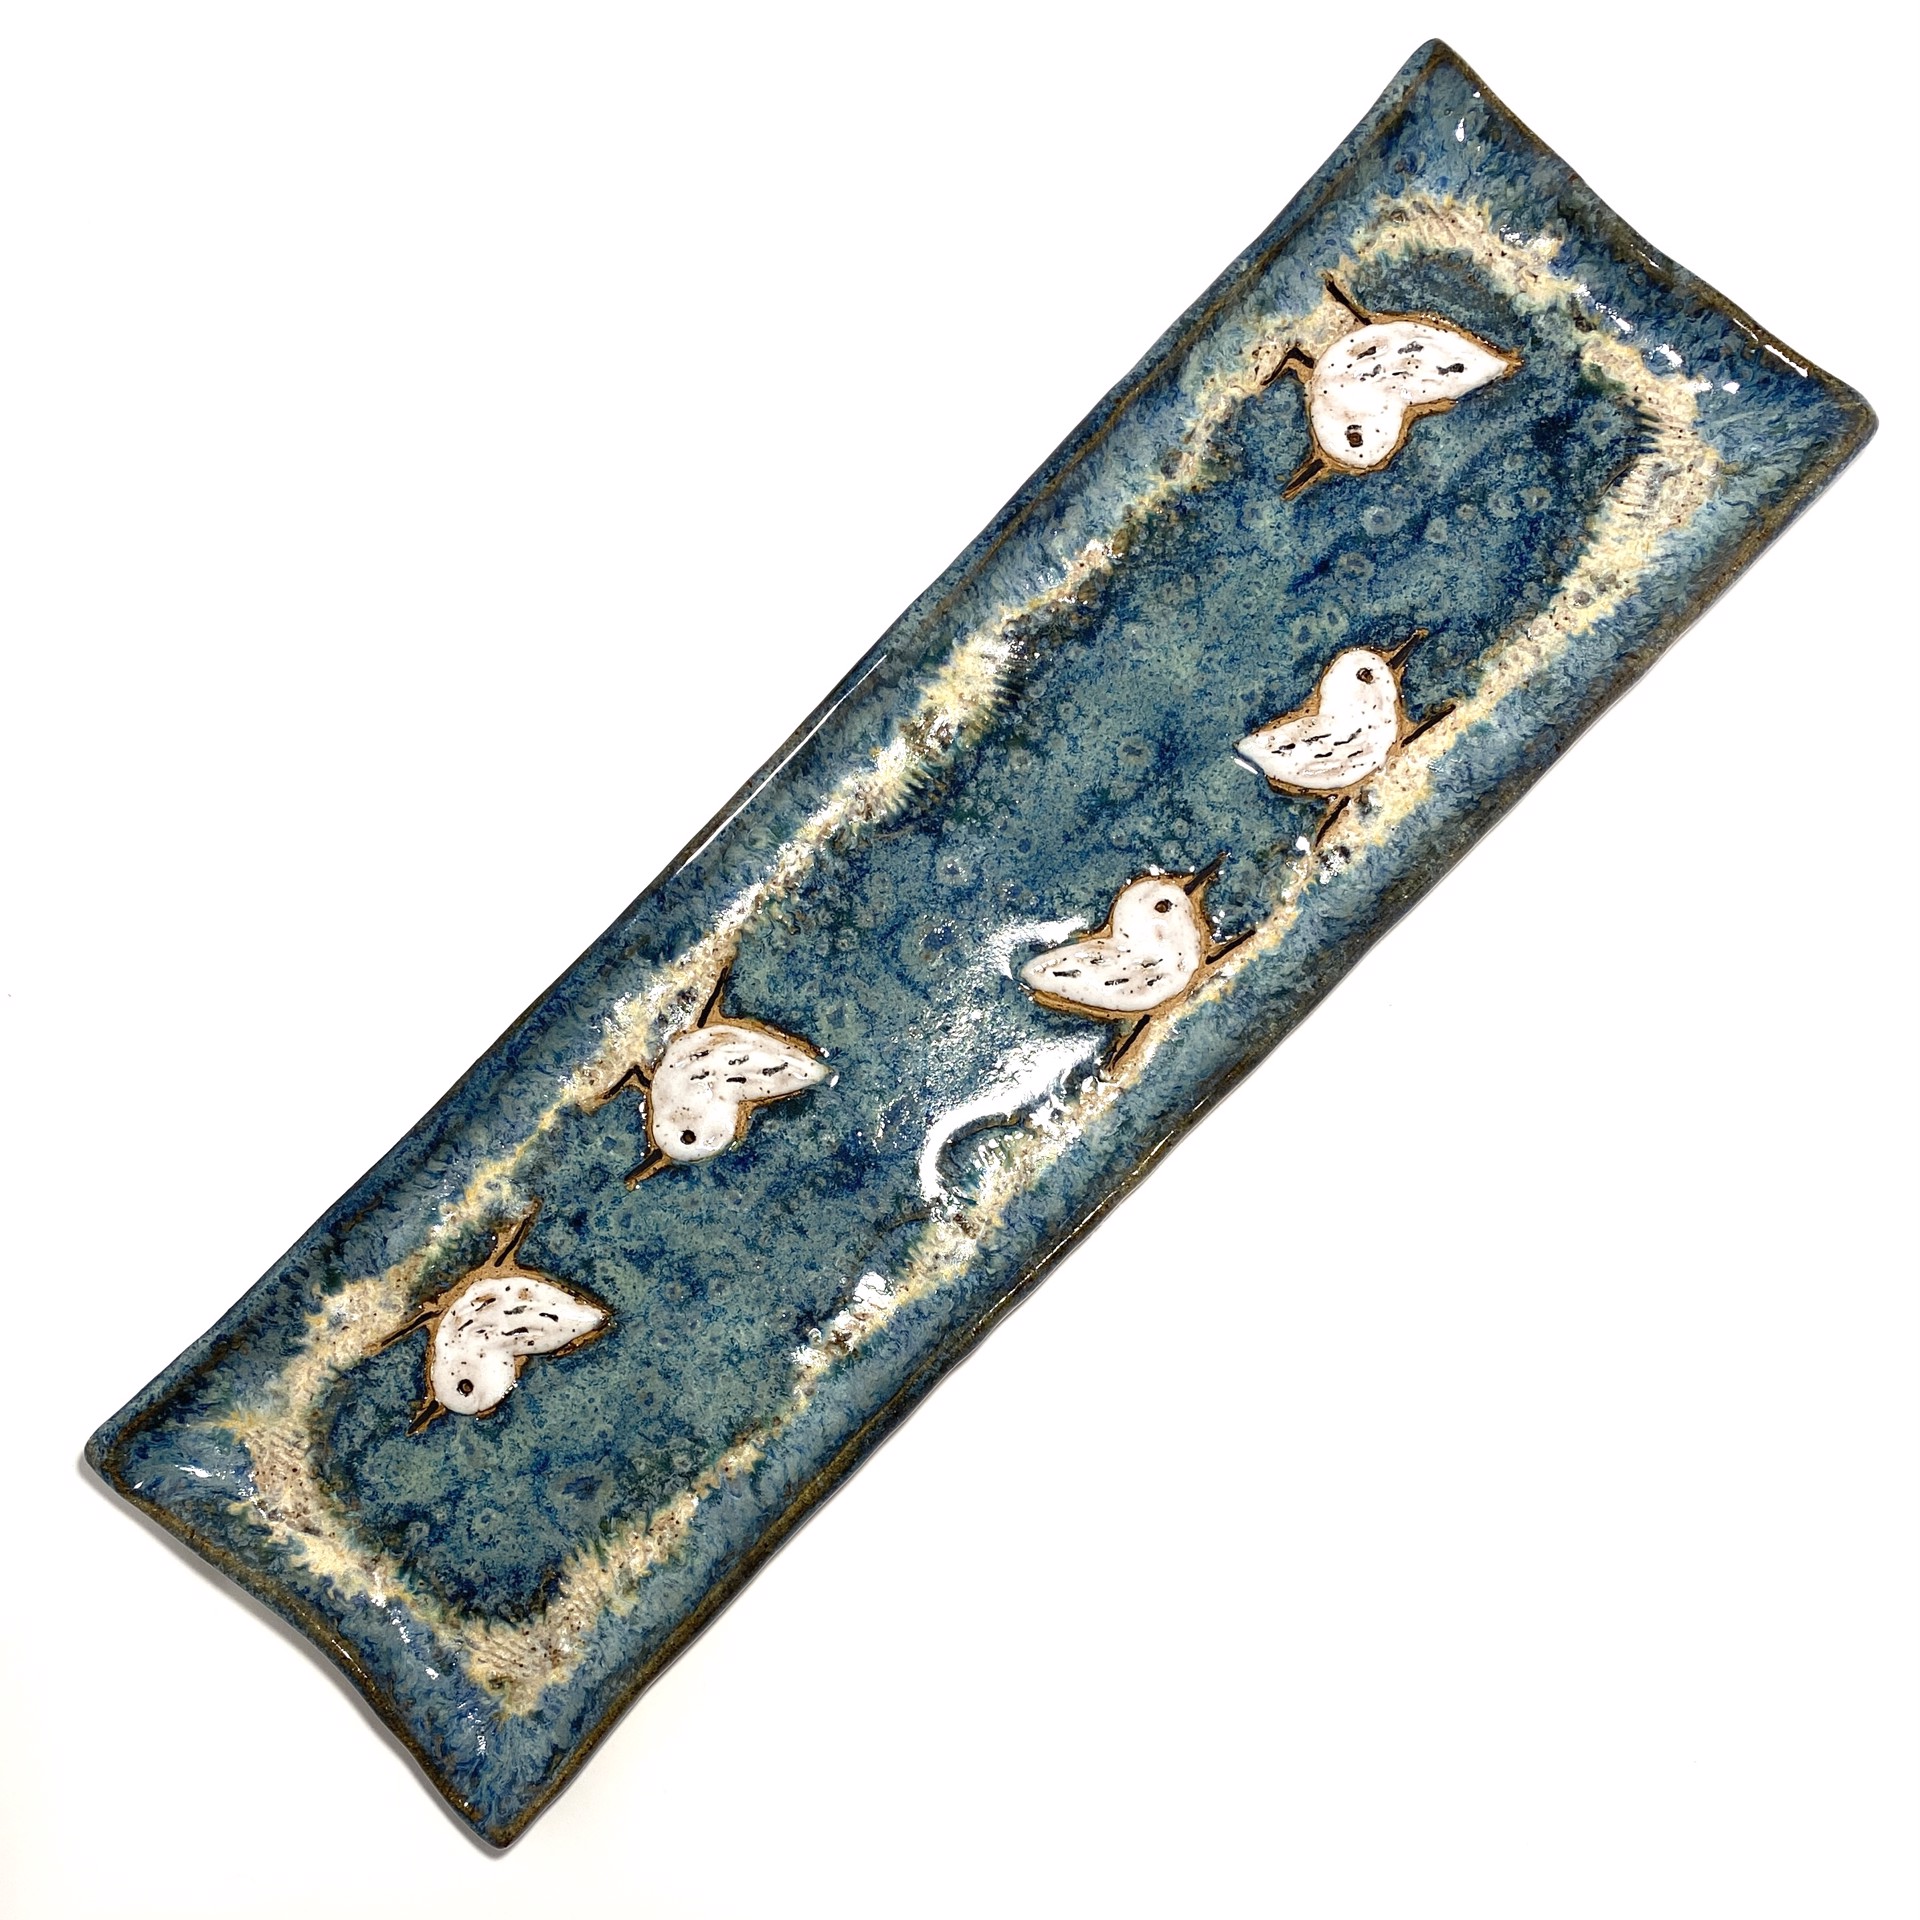 Wide Tray with Five Sandpipers (Blue Glaze) LG23-1137 by Jim & Steffi Logan